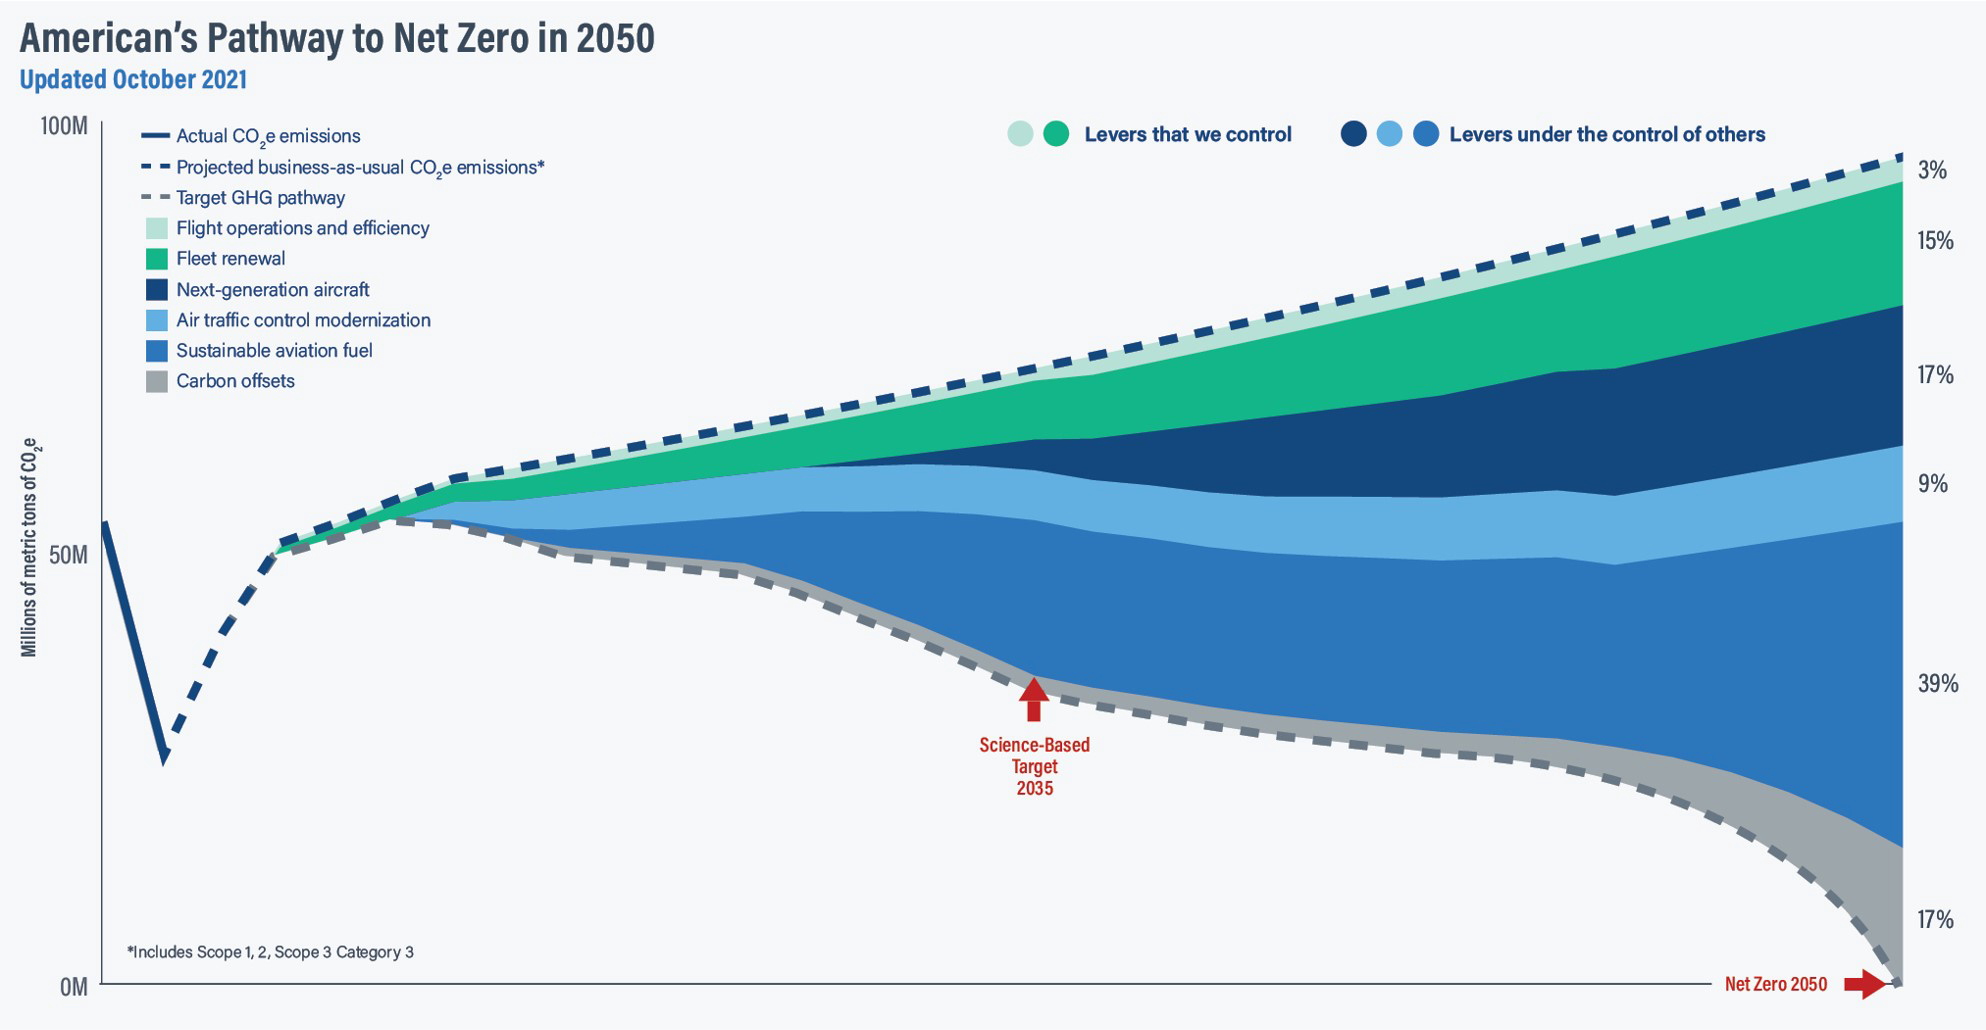 While American’s goal is to reach net-zero emissions by 2050, the airline has also set a science-based intermediate target for the year 2035. Click to enlarge.